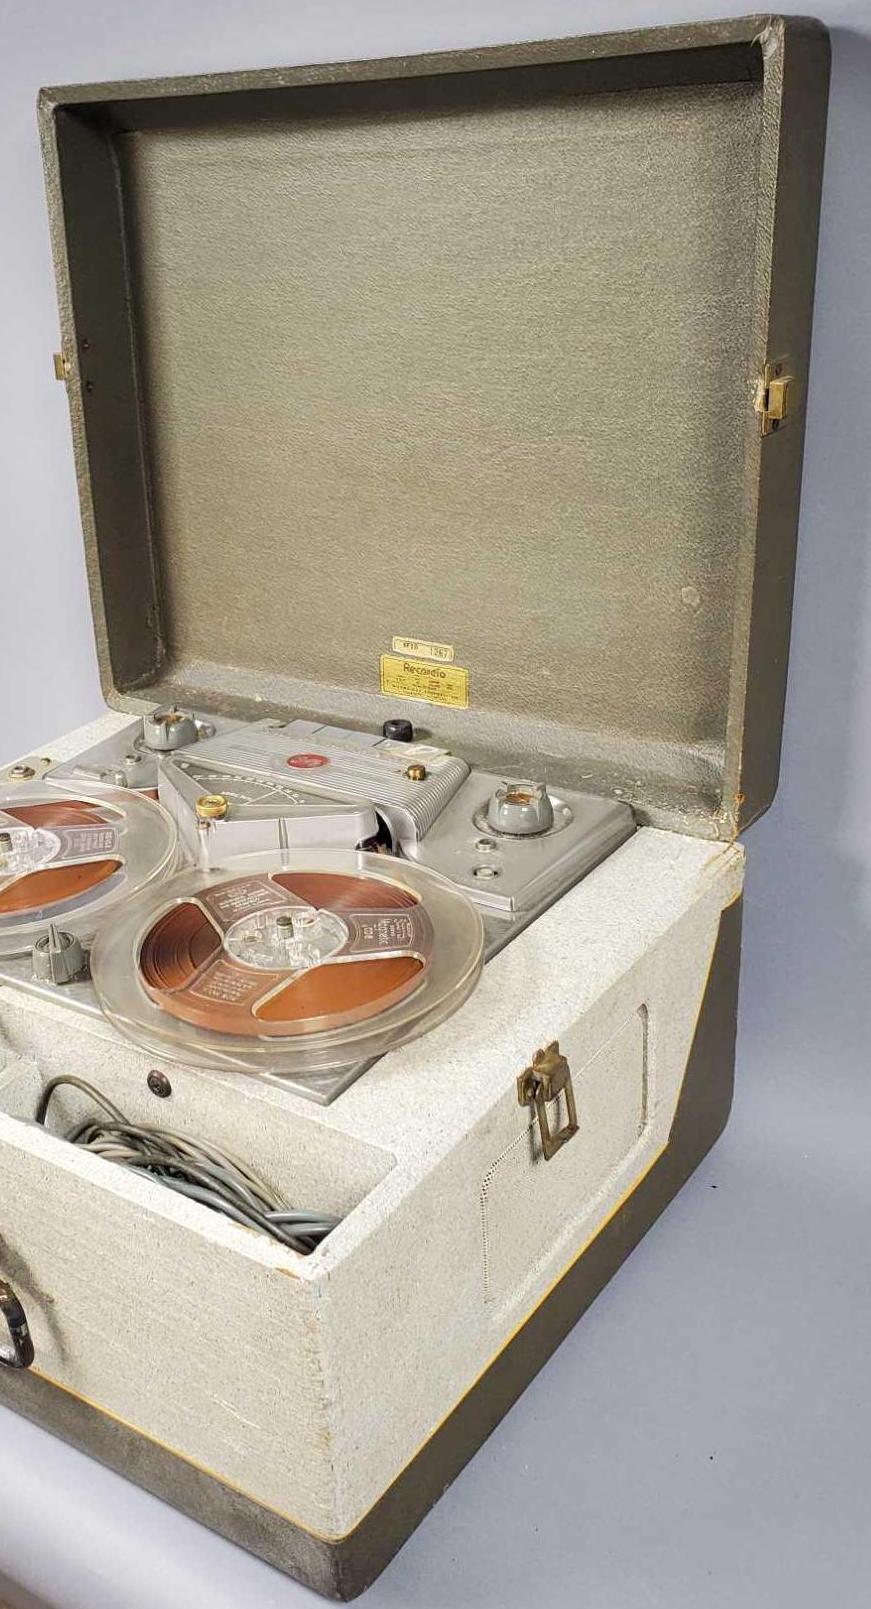 Vintage Sony MDR-V6 Reel to Reel Tape Player and Assorted 33rpm Records and Cassettes. (LPO)